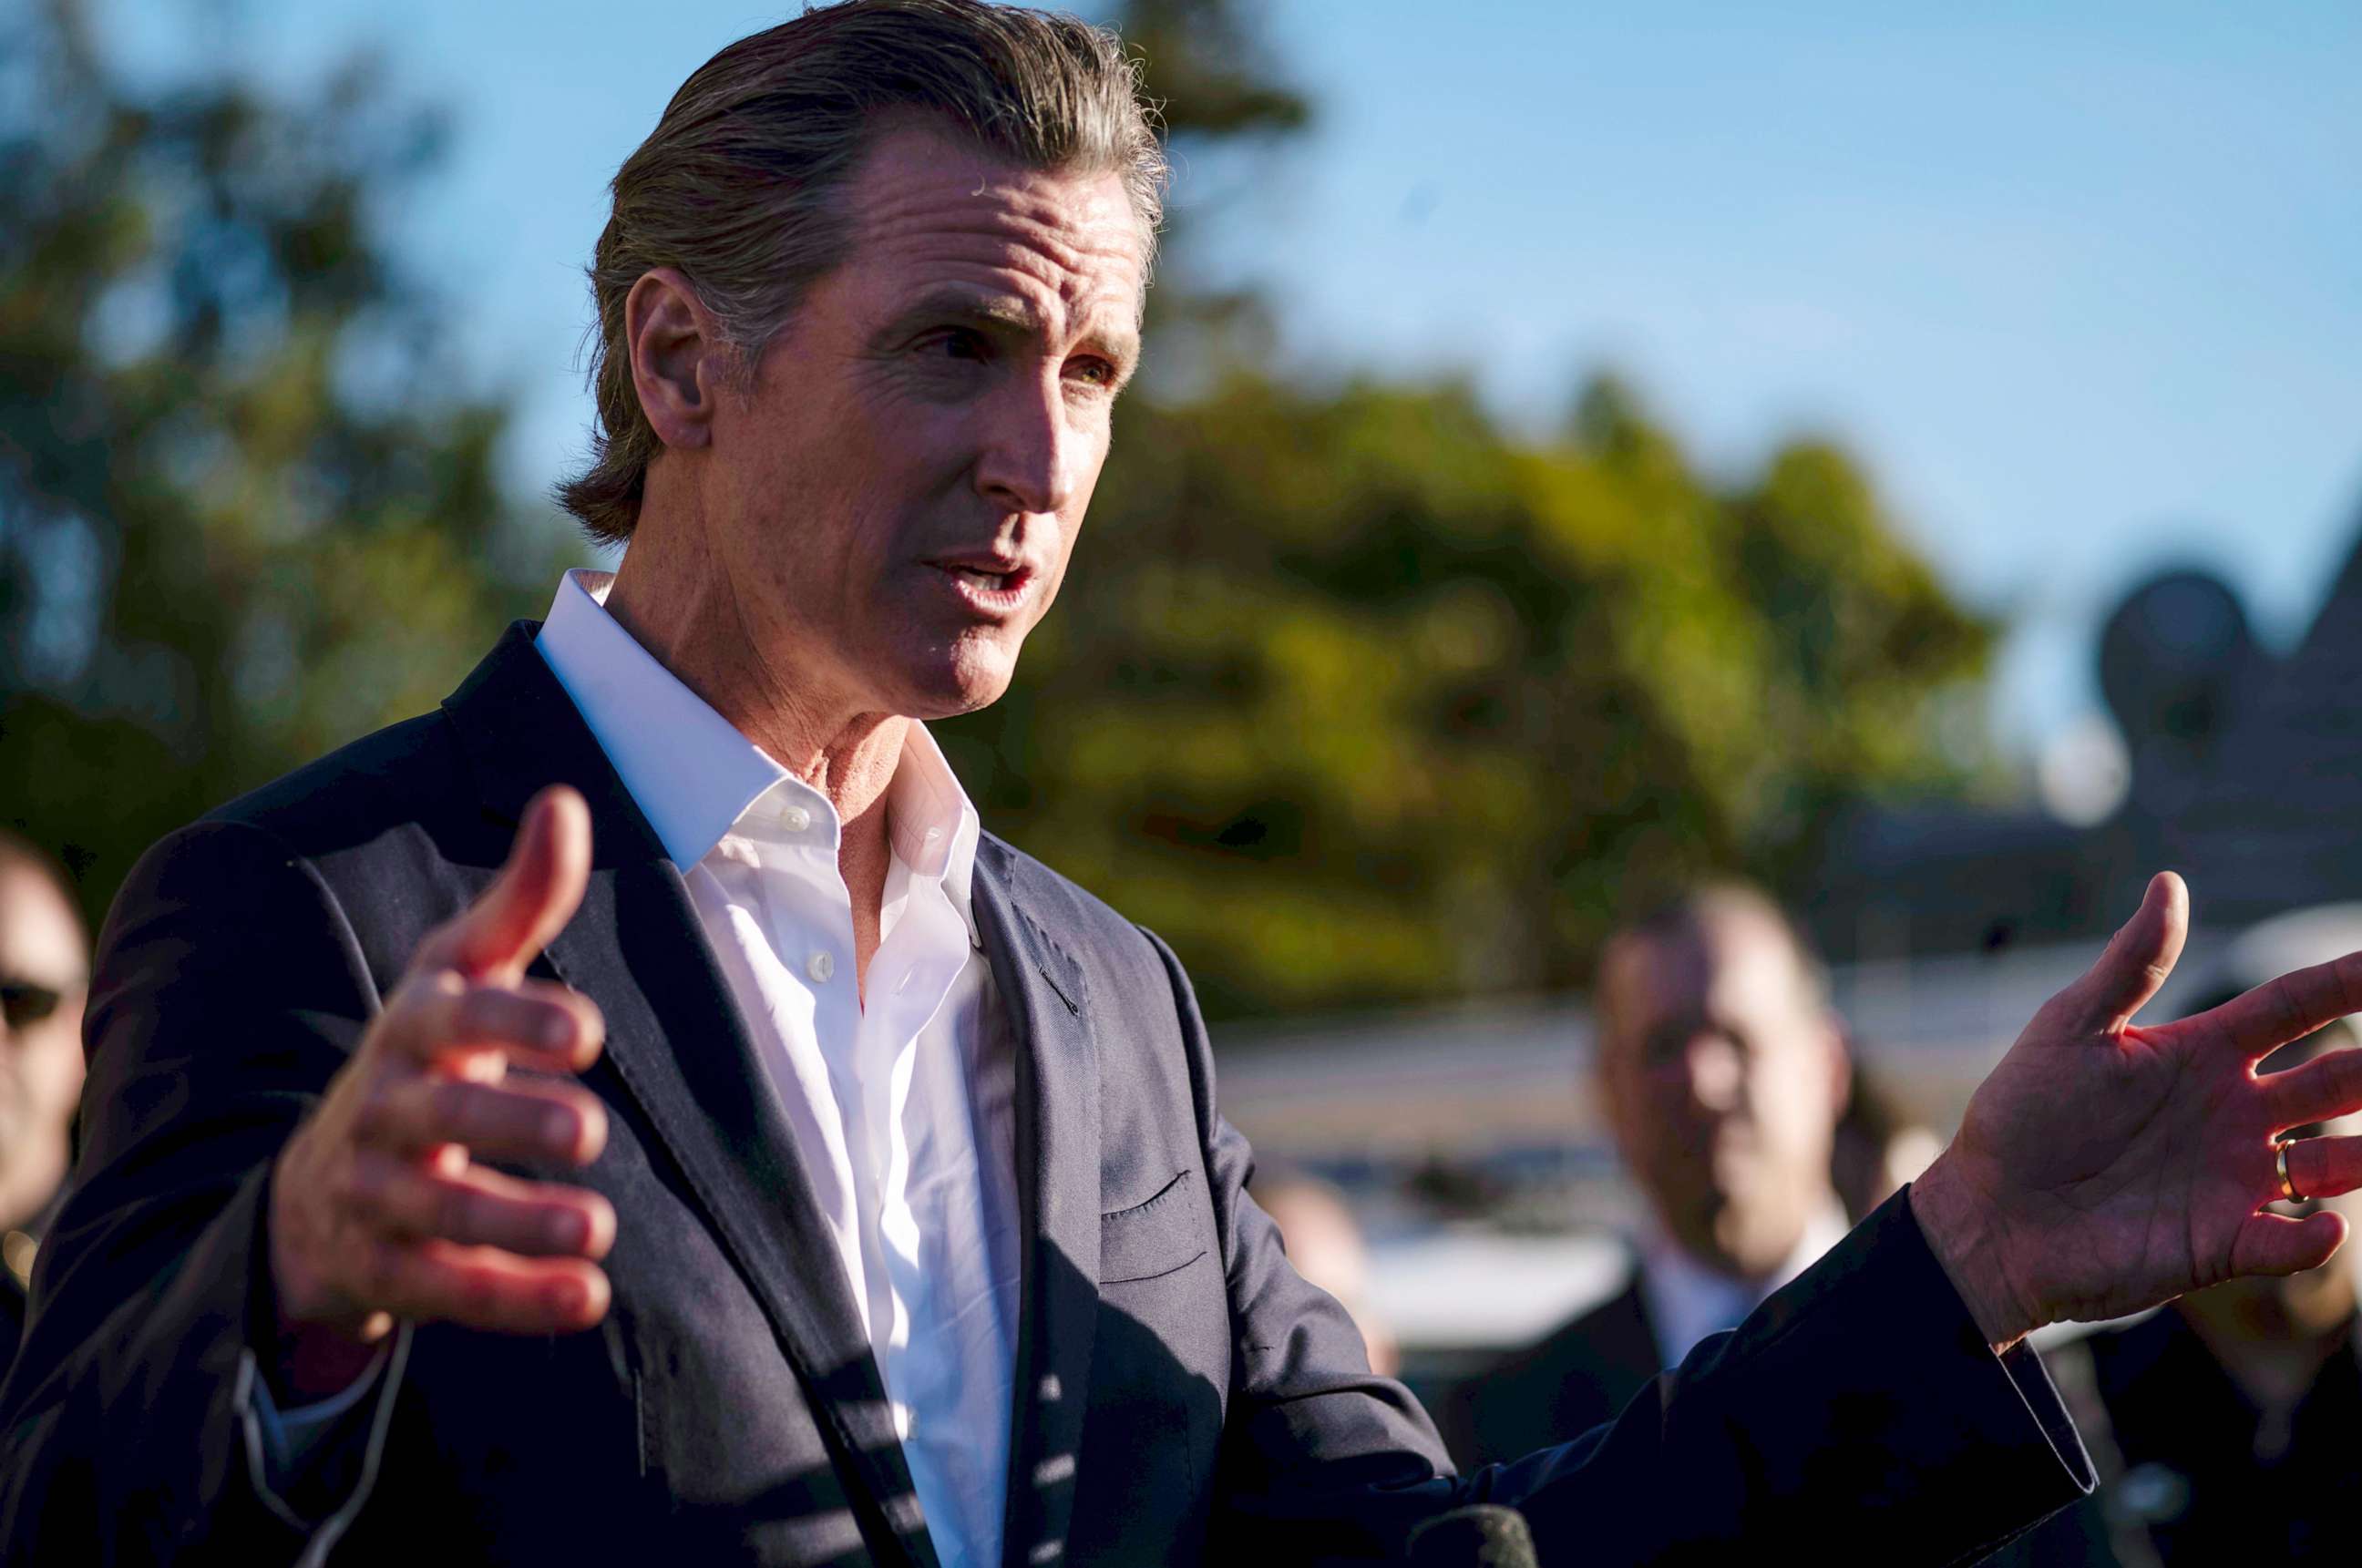 PHOTO: Governor Gavin Newsom met at the I.D.E.S. Portuguese Hall in Half Moon Bay, Calif., with victims' families, local leaders and community members that were impacted by the devastating shootings at two mushroom farms yesterday, Jan. 24, 2023.